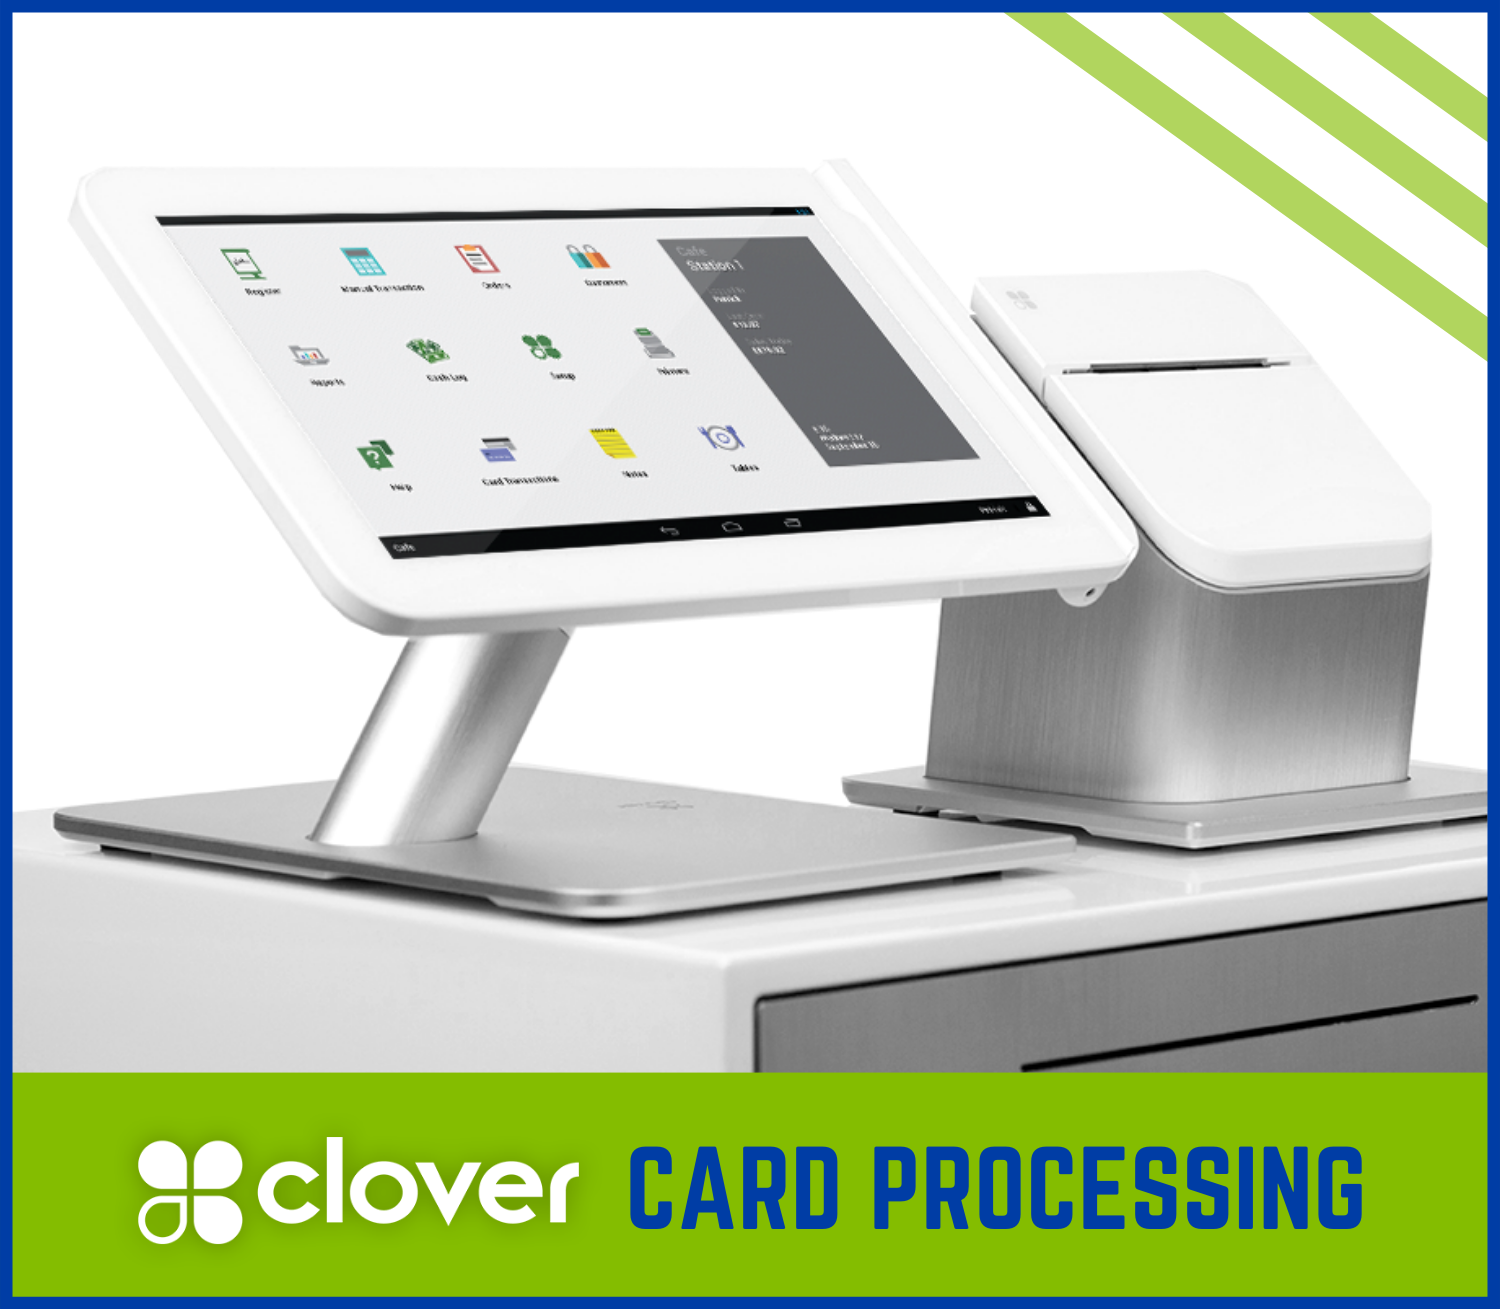 Clover Card Processing for Business